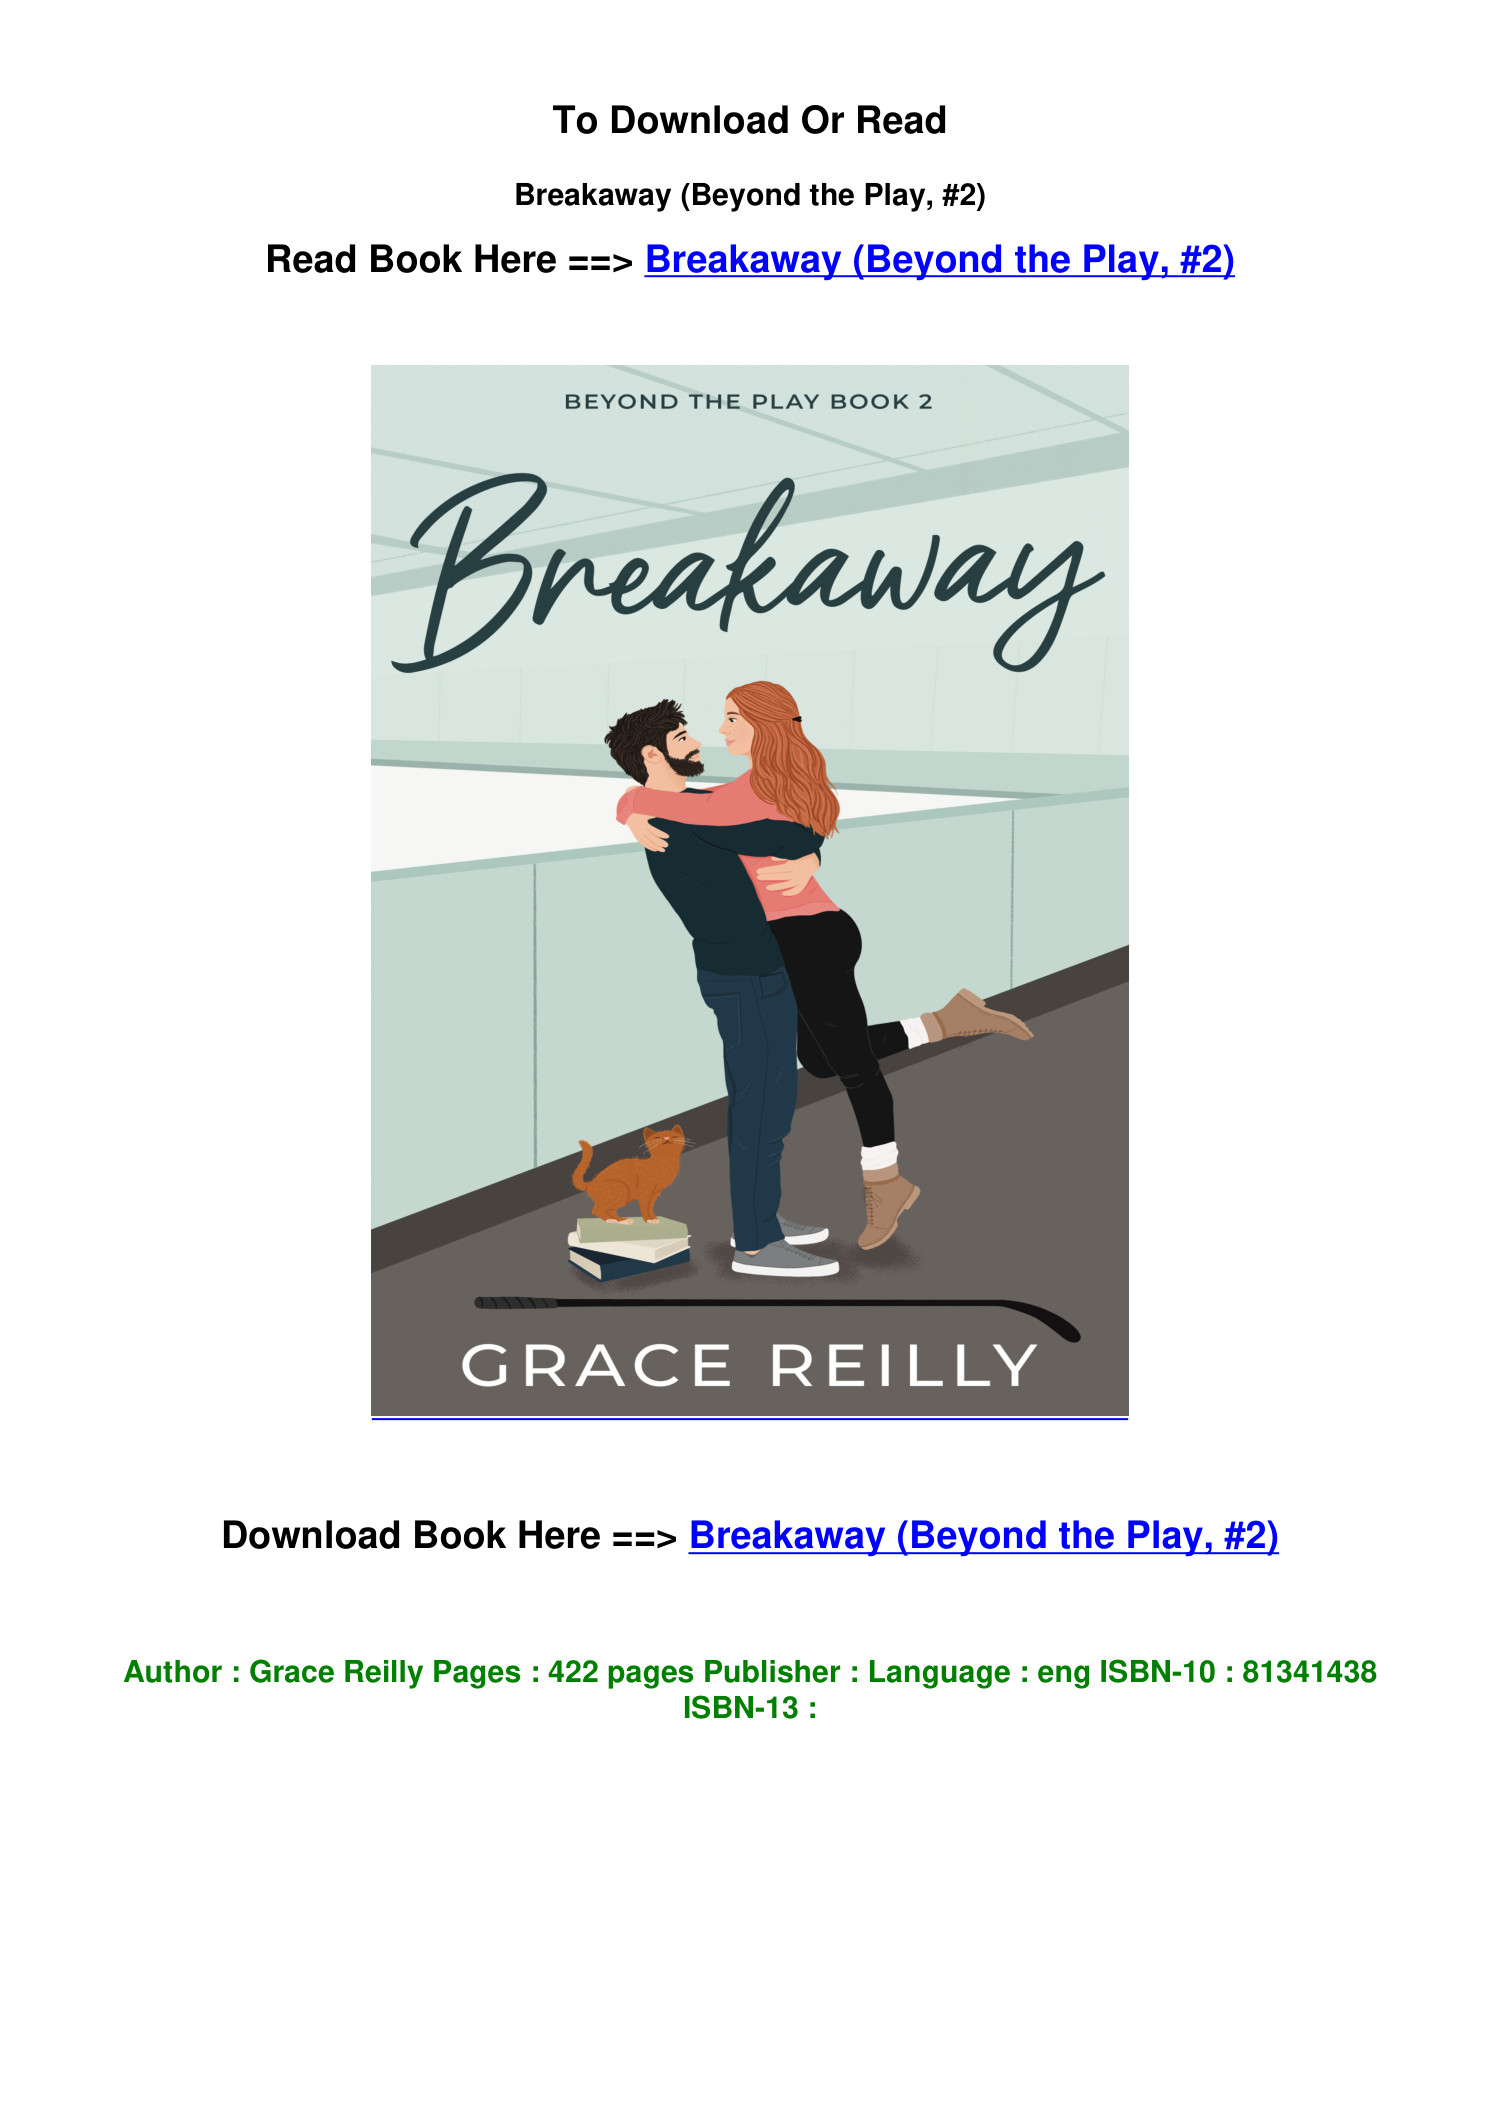 pdf download Breakaway Beyond the Play 2 BY Grace Reilly.pdf | DocDroid